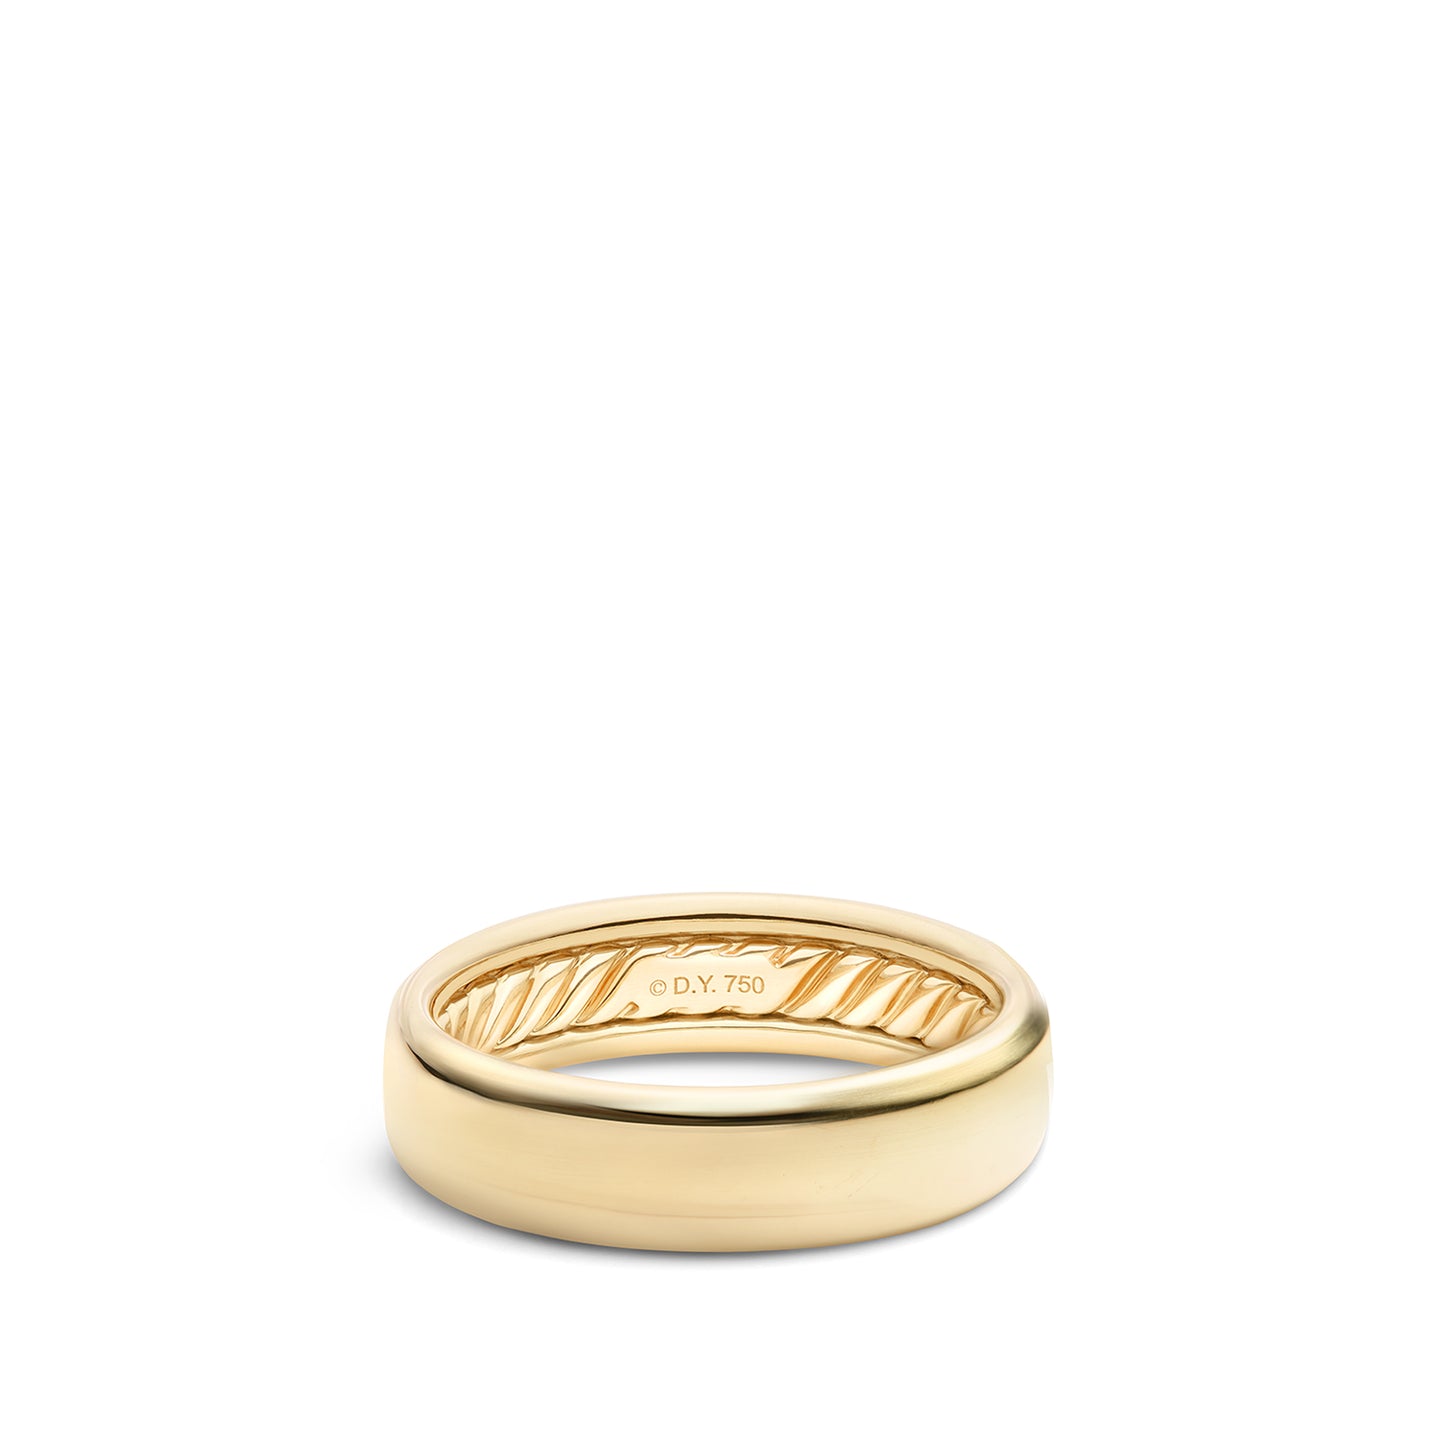 DY Classic Band Ring in 18K Yellow Gold, Size 10